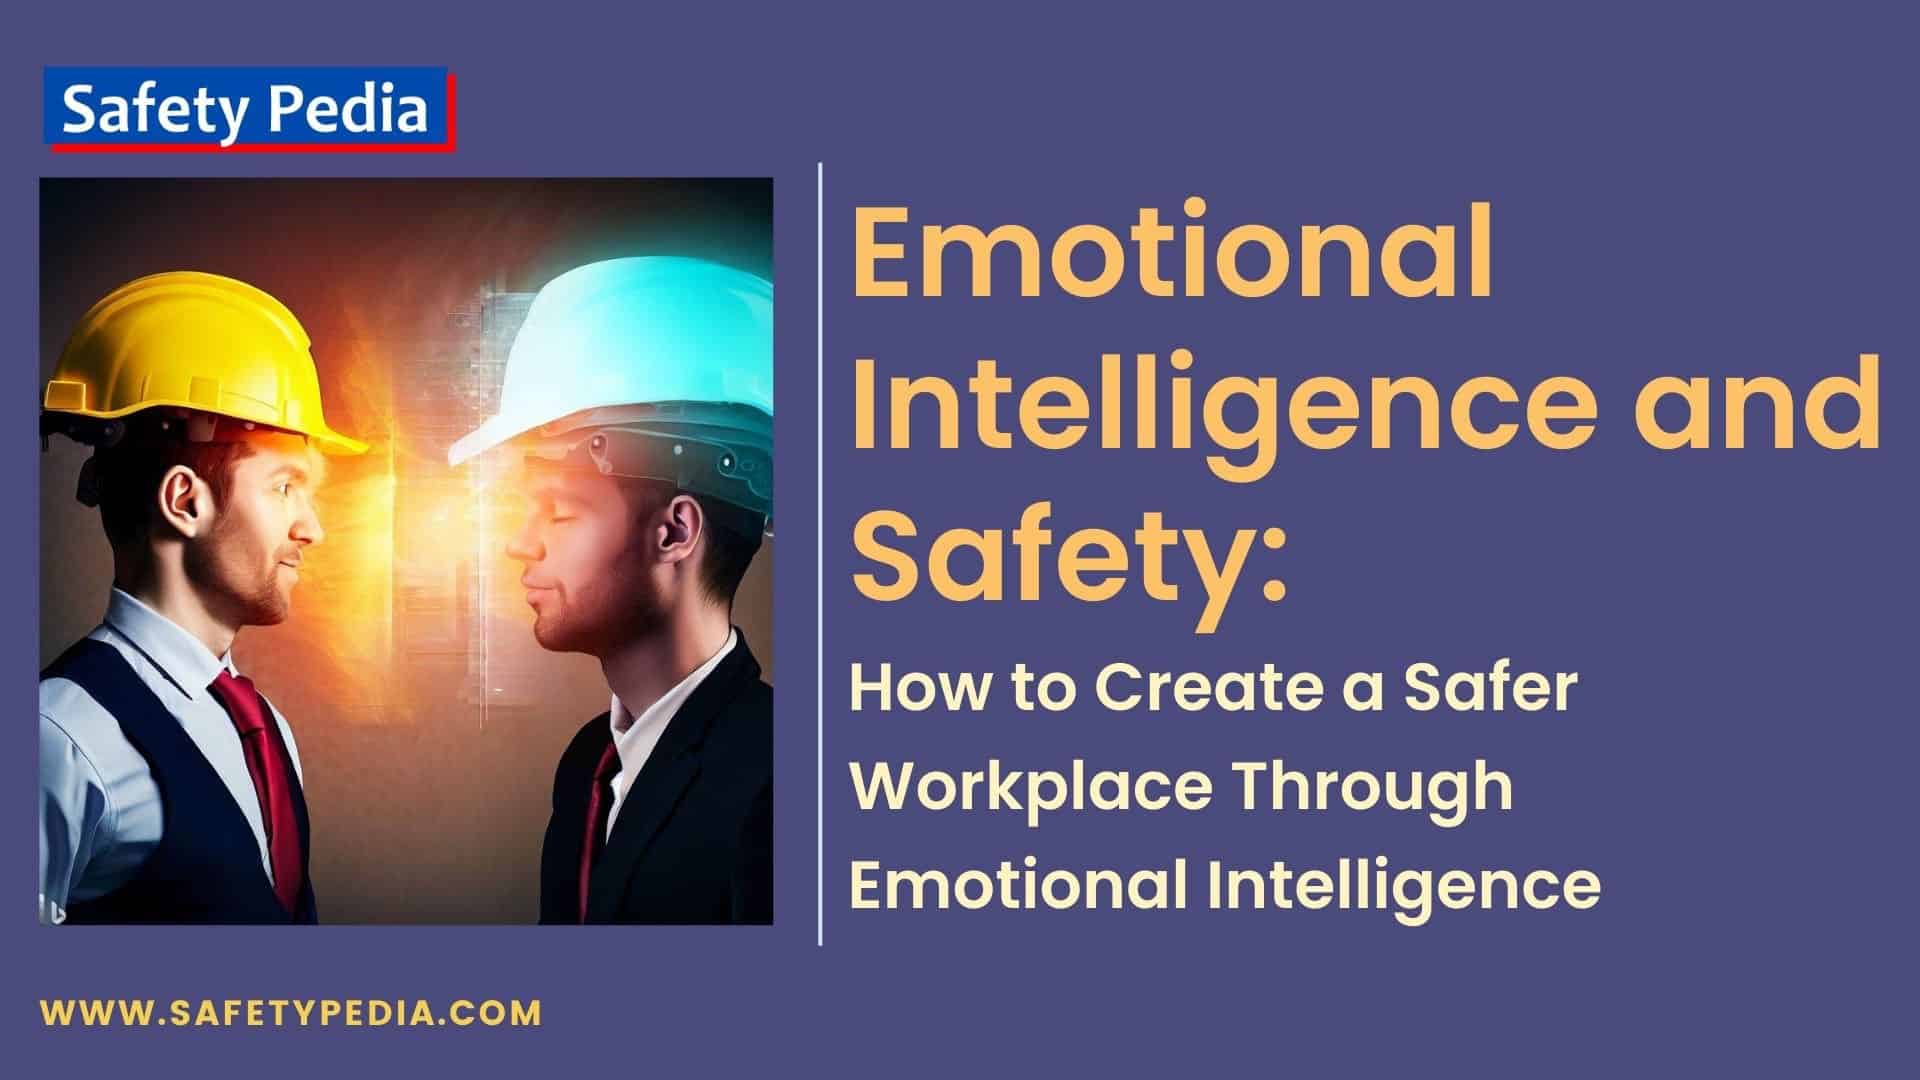 How to Create a Safer Workplace Through Emotional Intelligence. Two persons in calm emotions can give better safety performance.